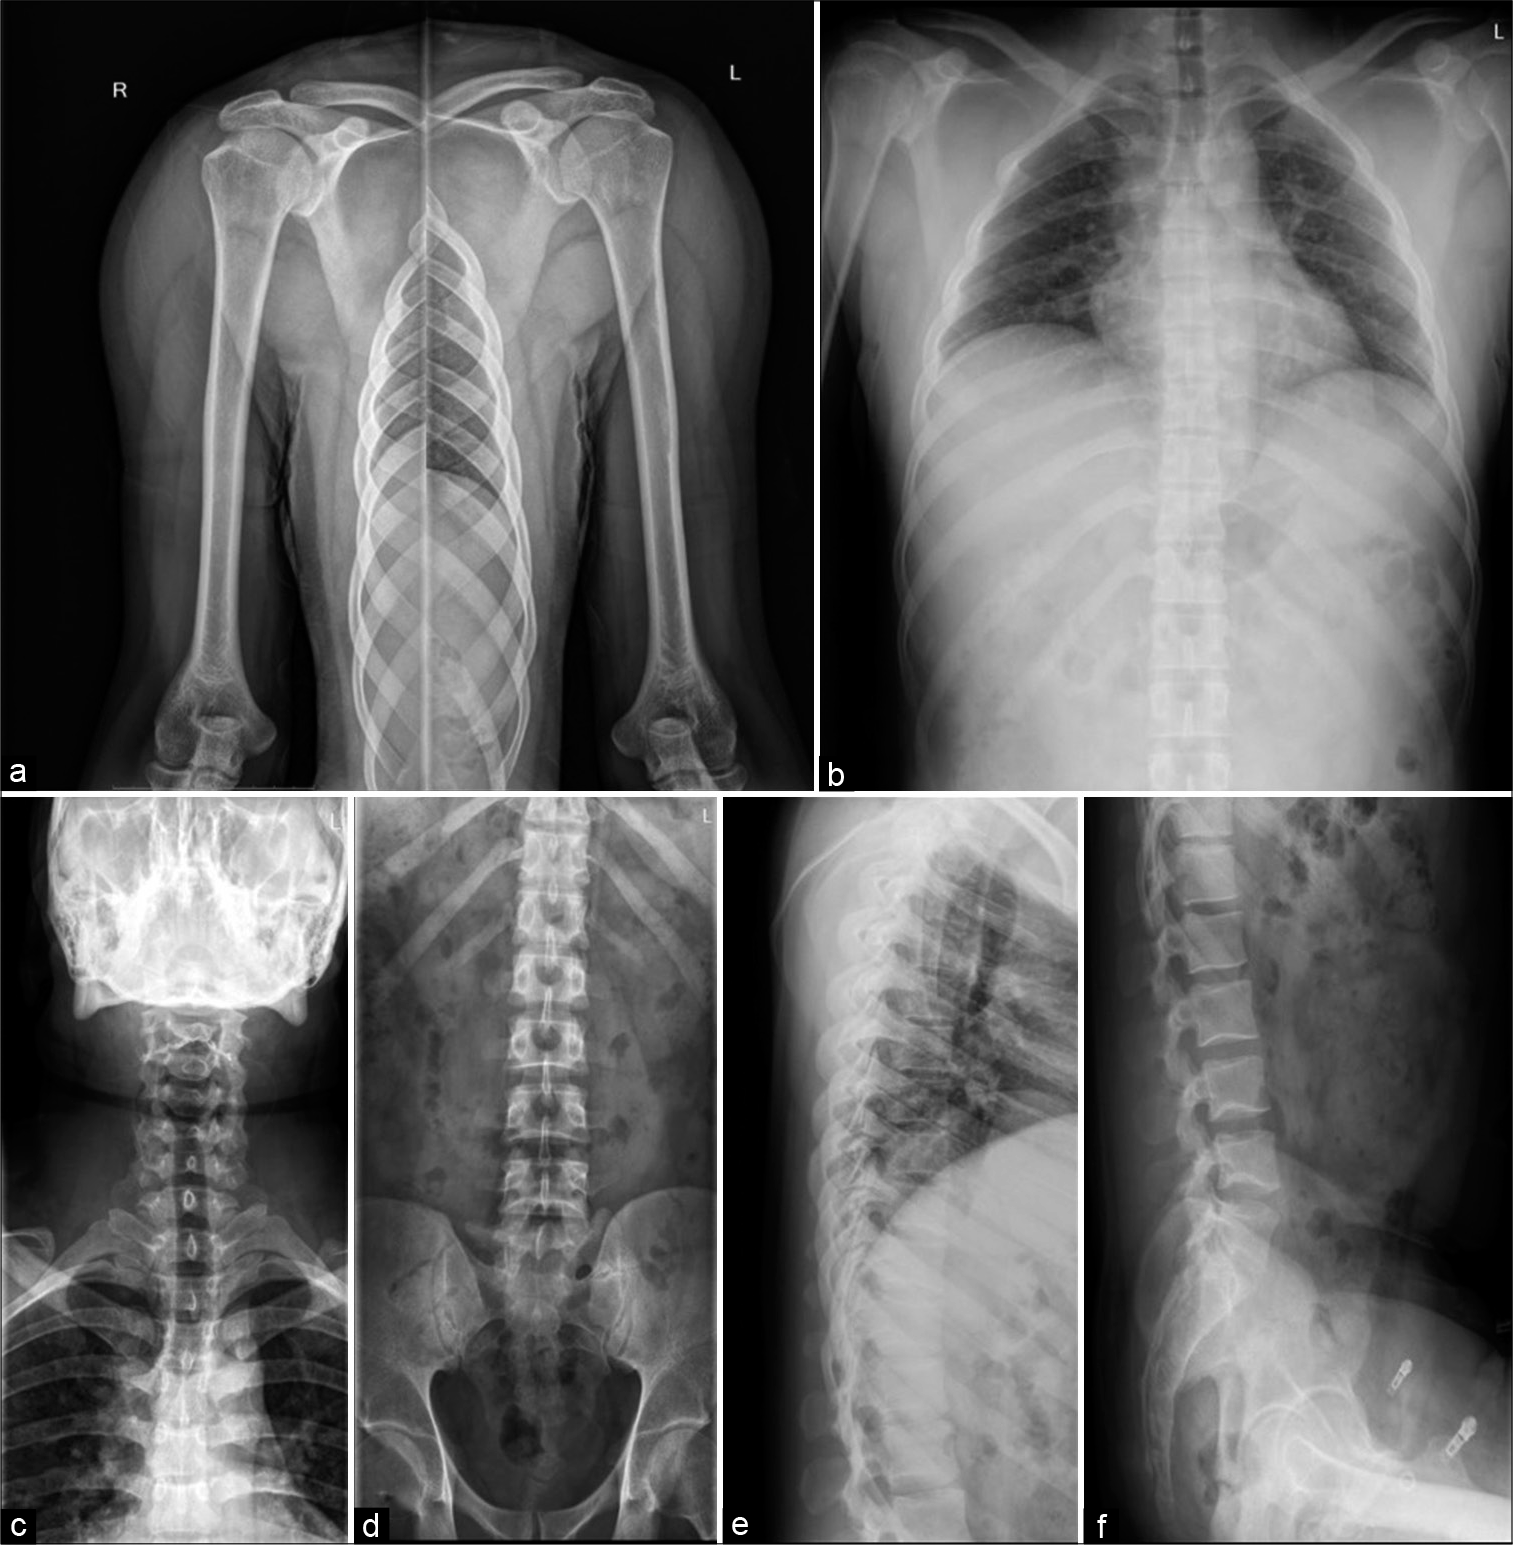 Frontal radiograph of both shoulder with humeri (a), Dorsal spine anterior-posterior (AP) (b) and Lateral view (e), Cervical spine AP (c), Lumbar spine AP (d), and lateral (f) radiographs appear unremarkable.